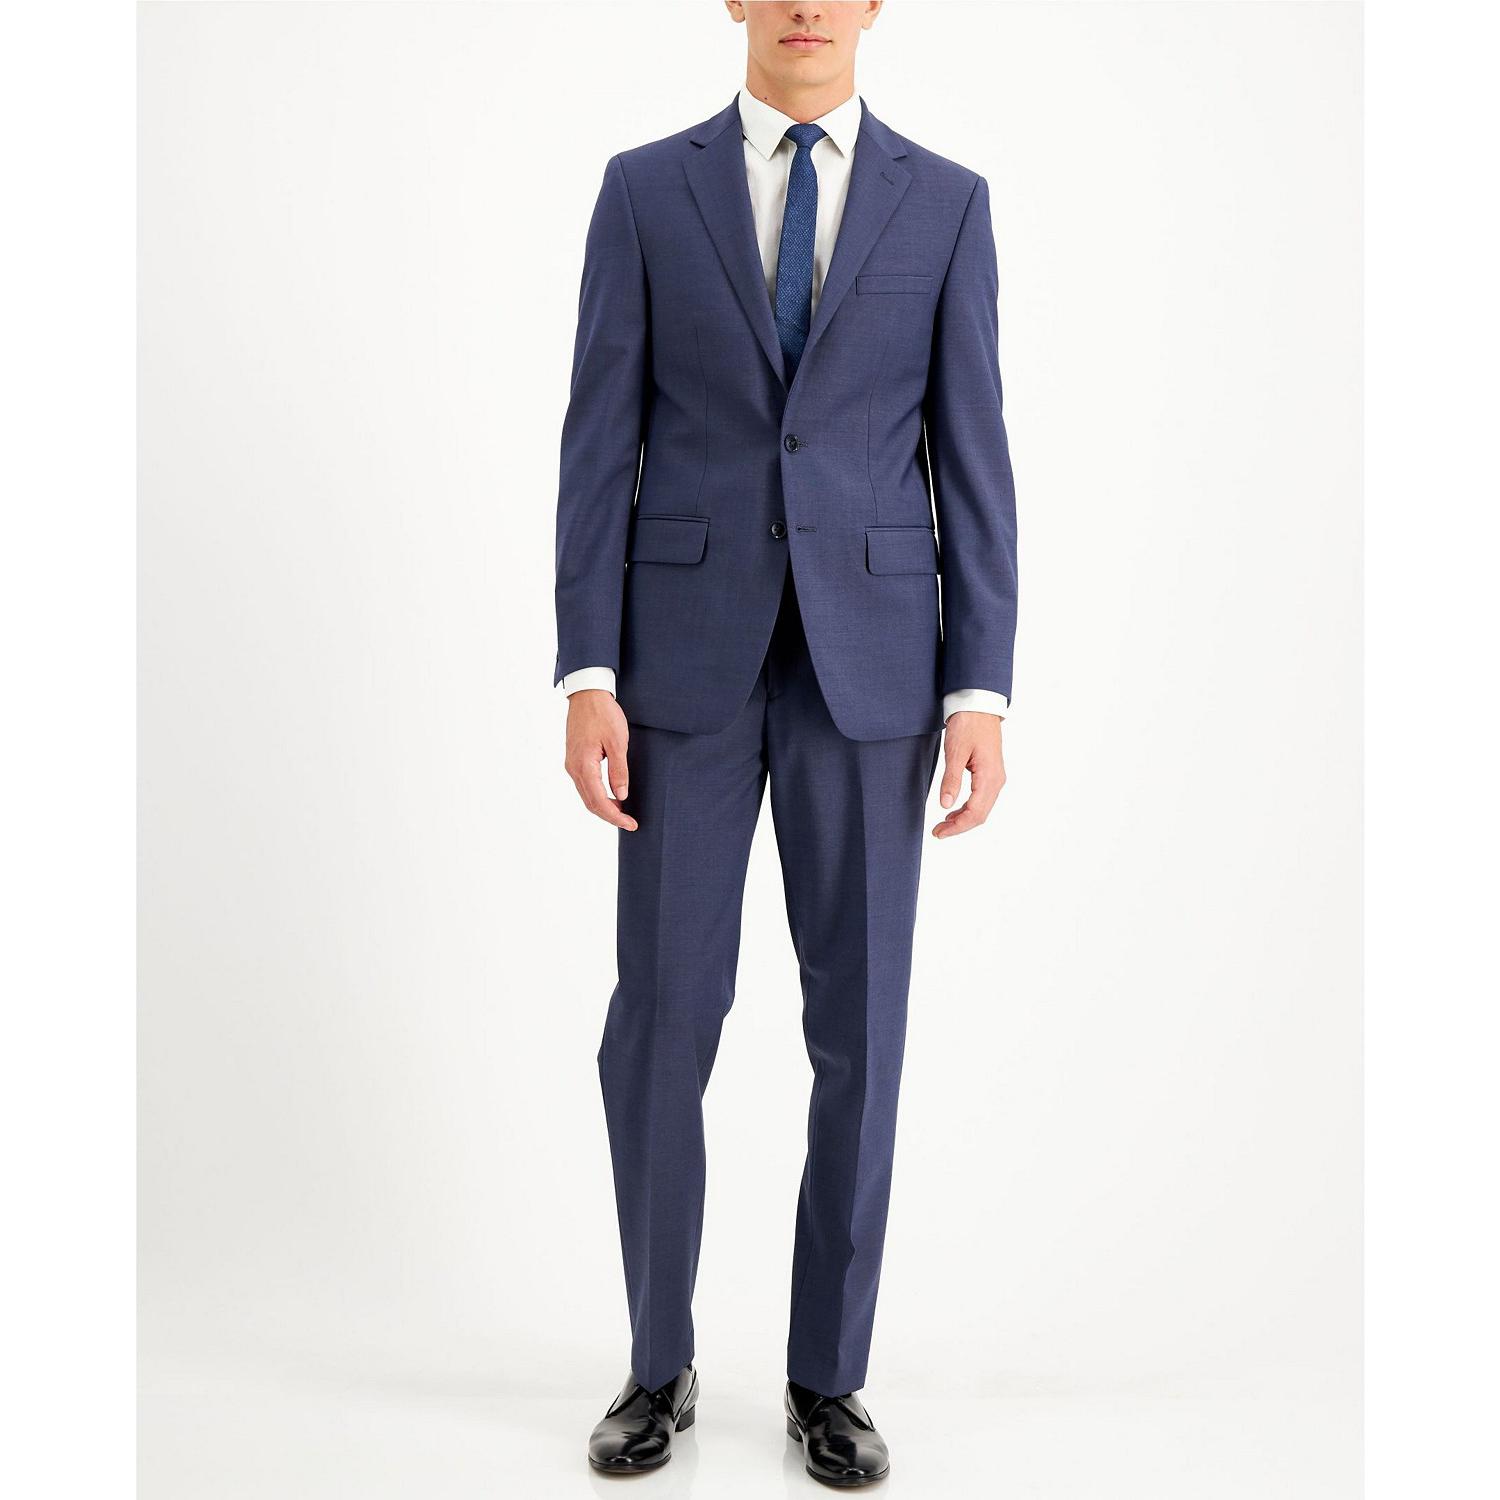 2-Piece Calvin Klein Mens Slim Fit Wool Suit for $96.99 Shipped